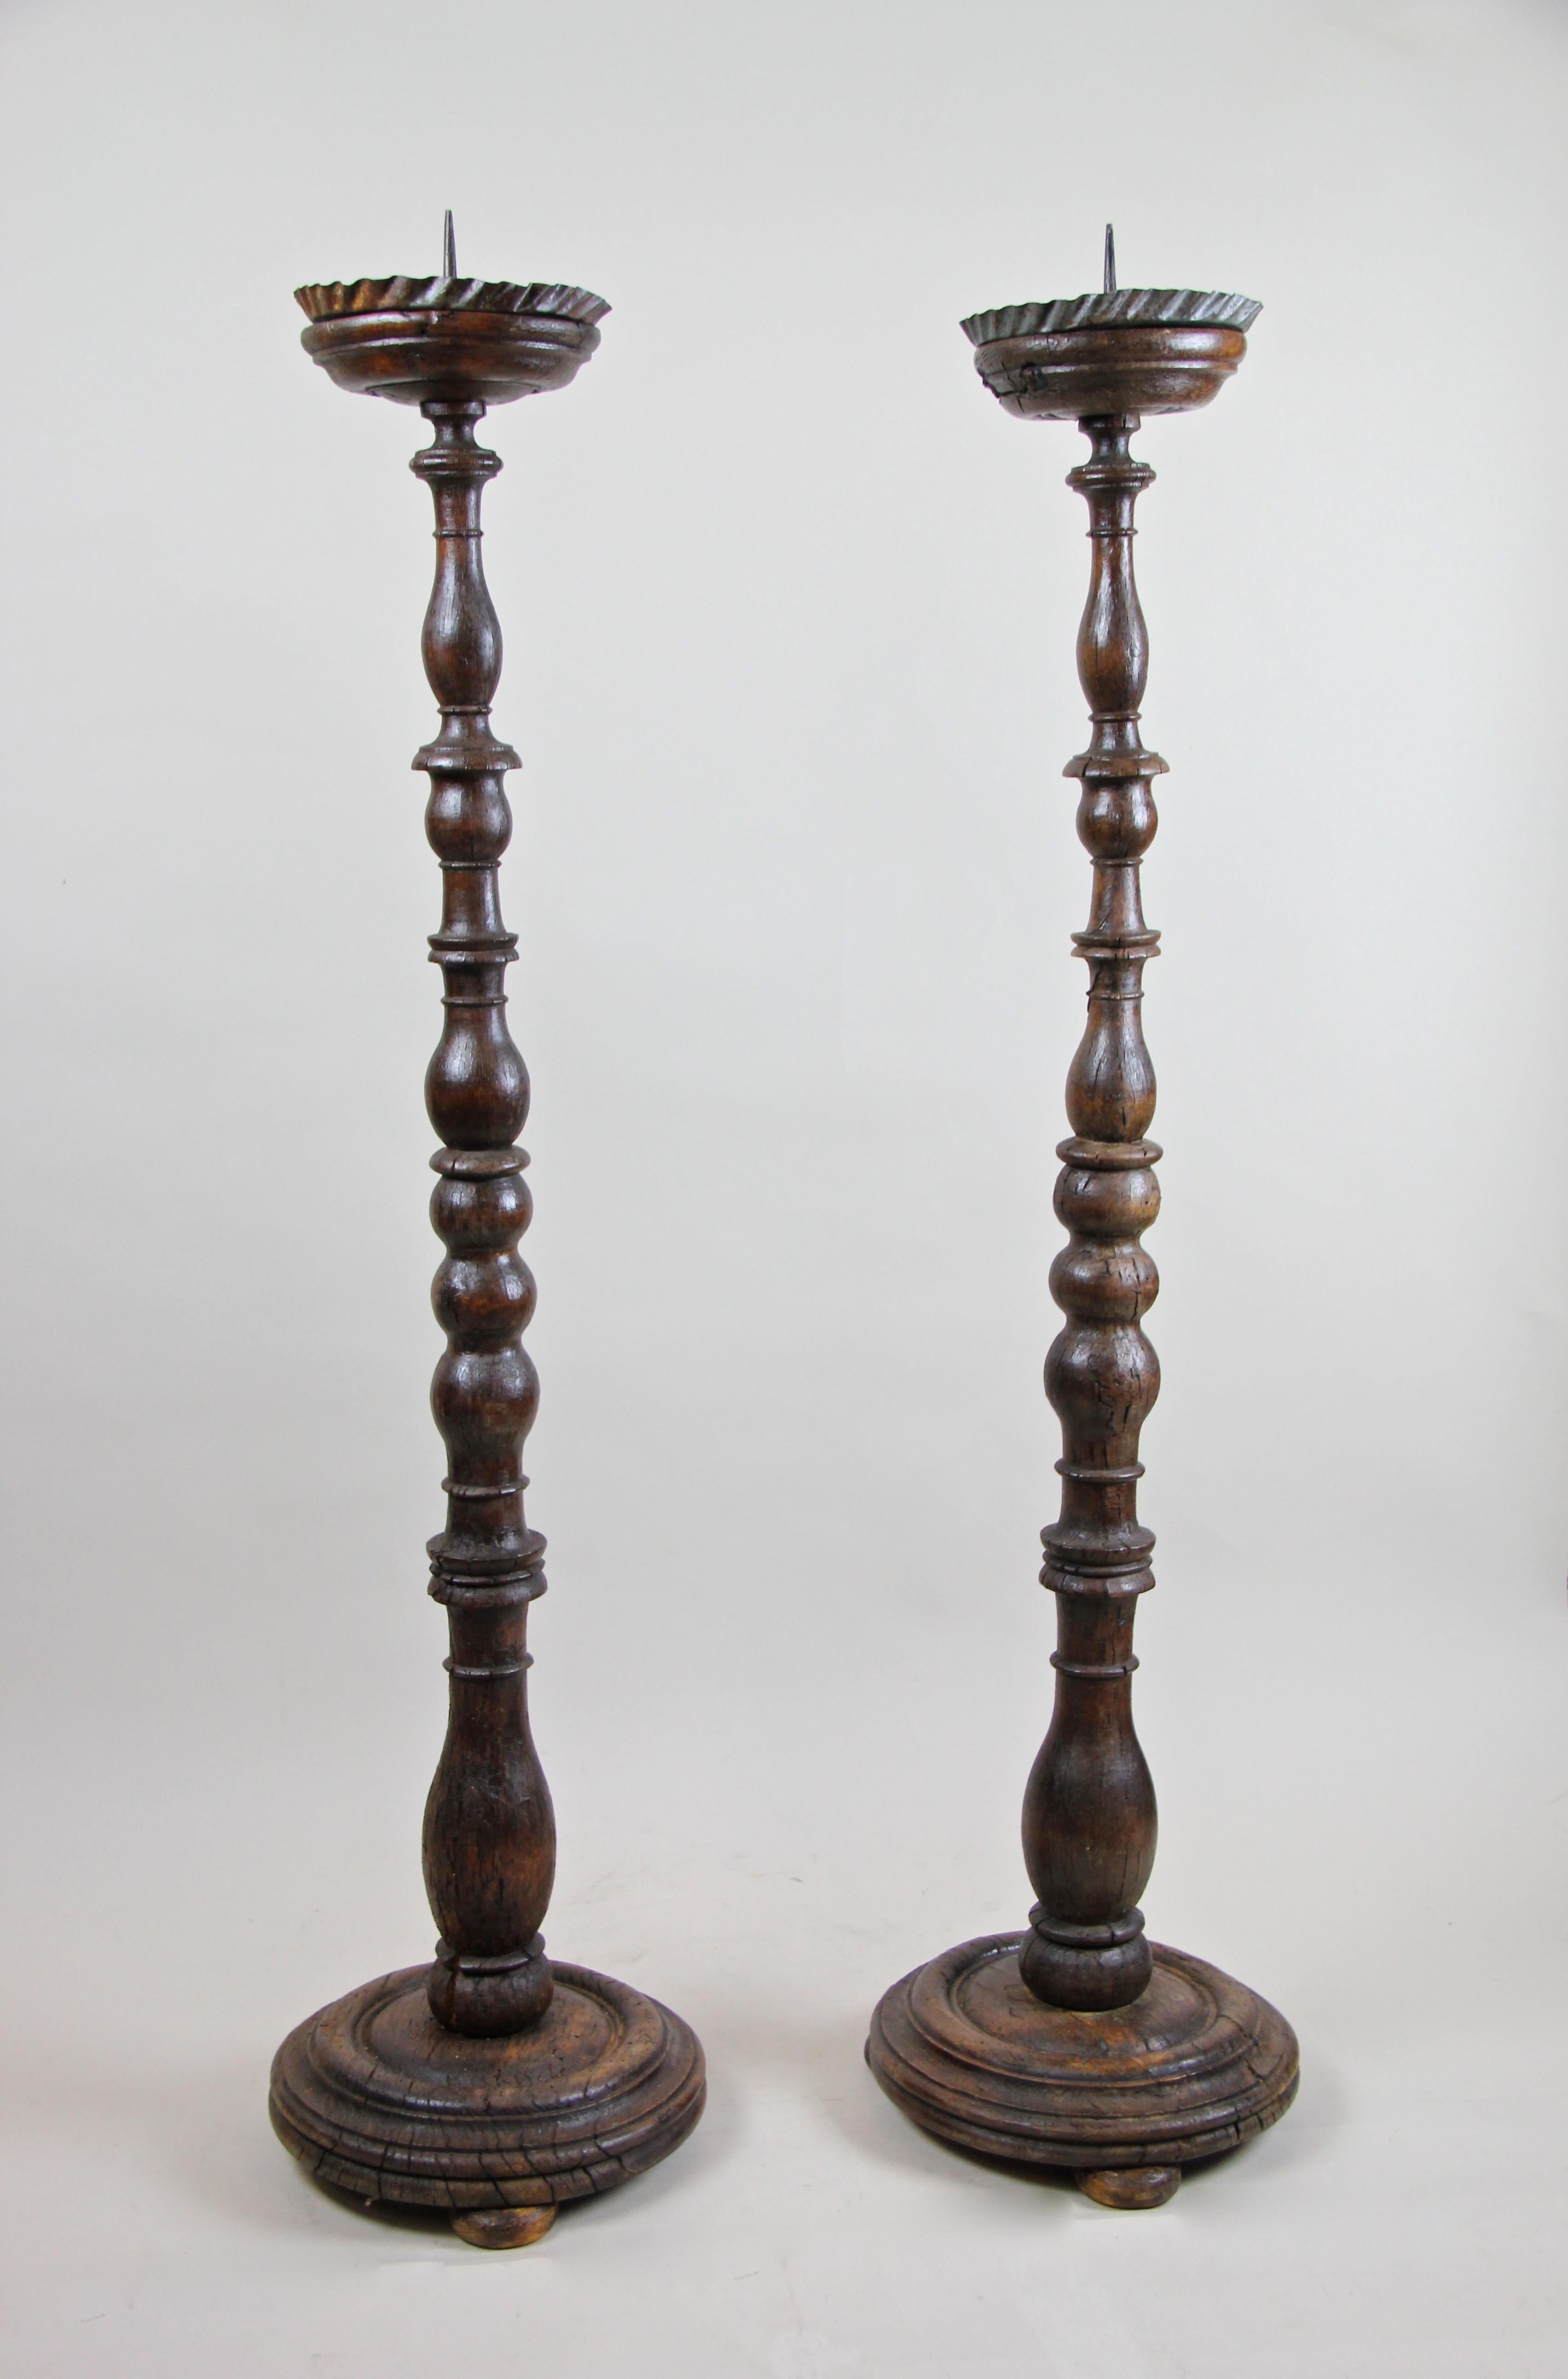 Wonderful rare pair of large Baroque candlesticks from the period circa 1770. Hand carved out of solid oakwood, these nearly 250 year old altar sticks come in great original condition, showing different stress cracks and inactive wormholes. But